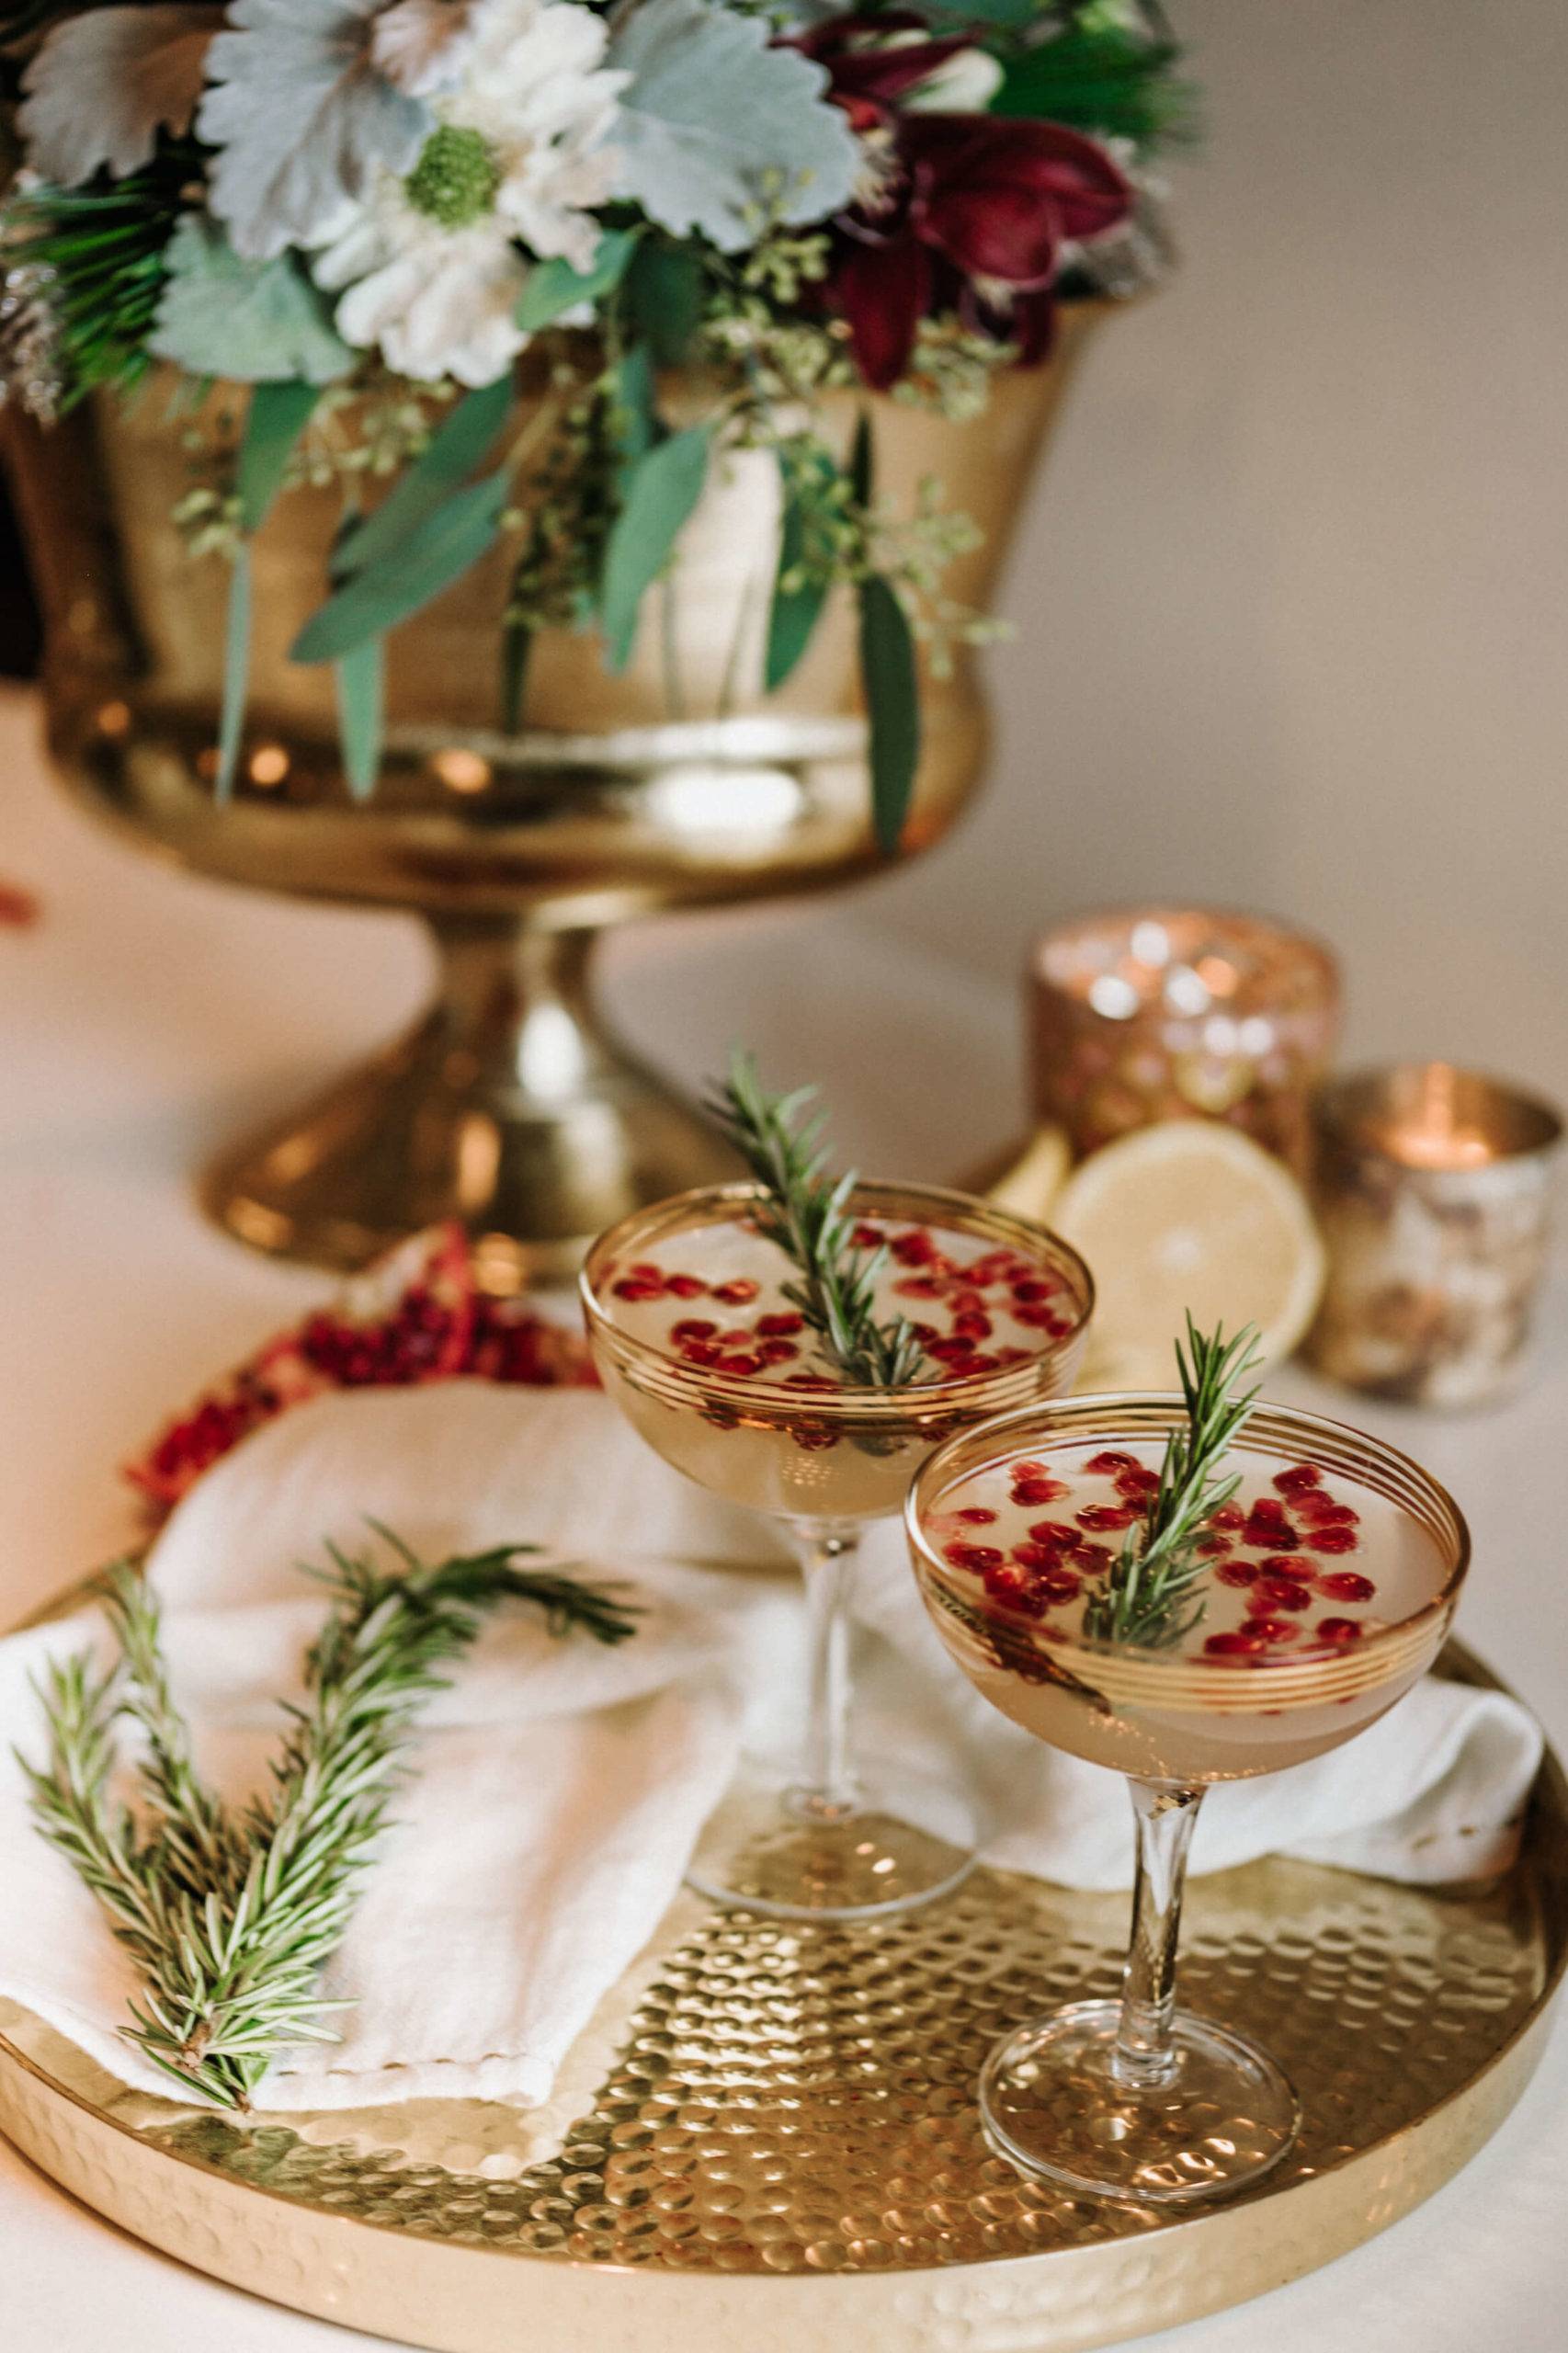 cocktail with rosemary and pomegranate